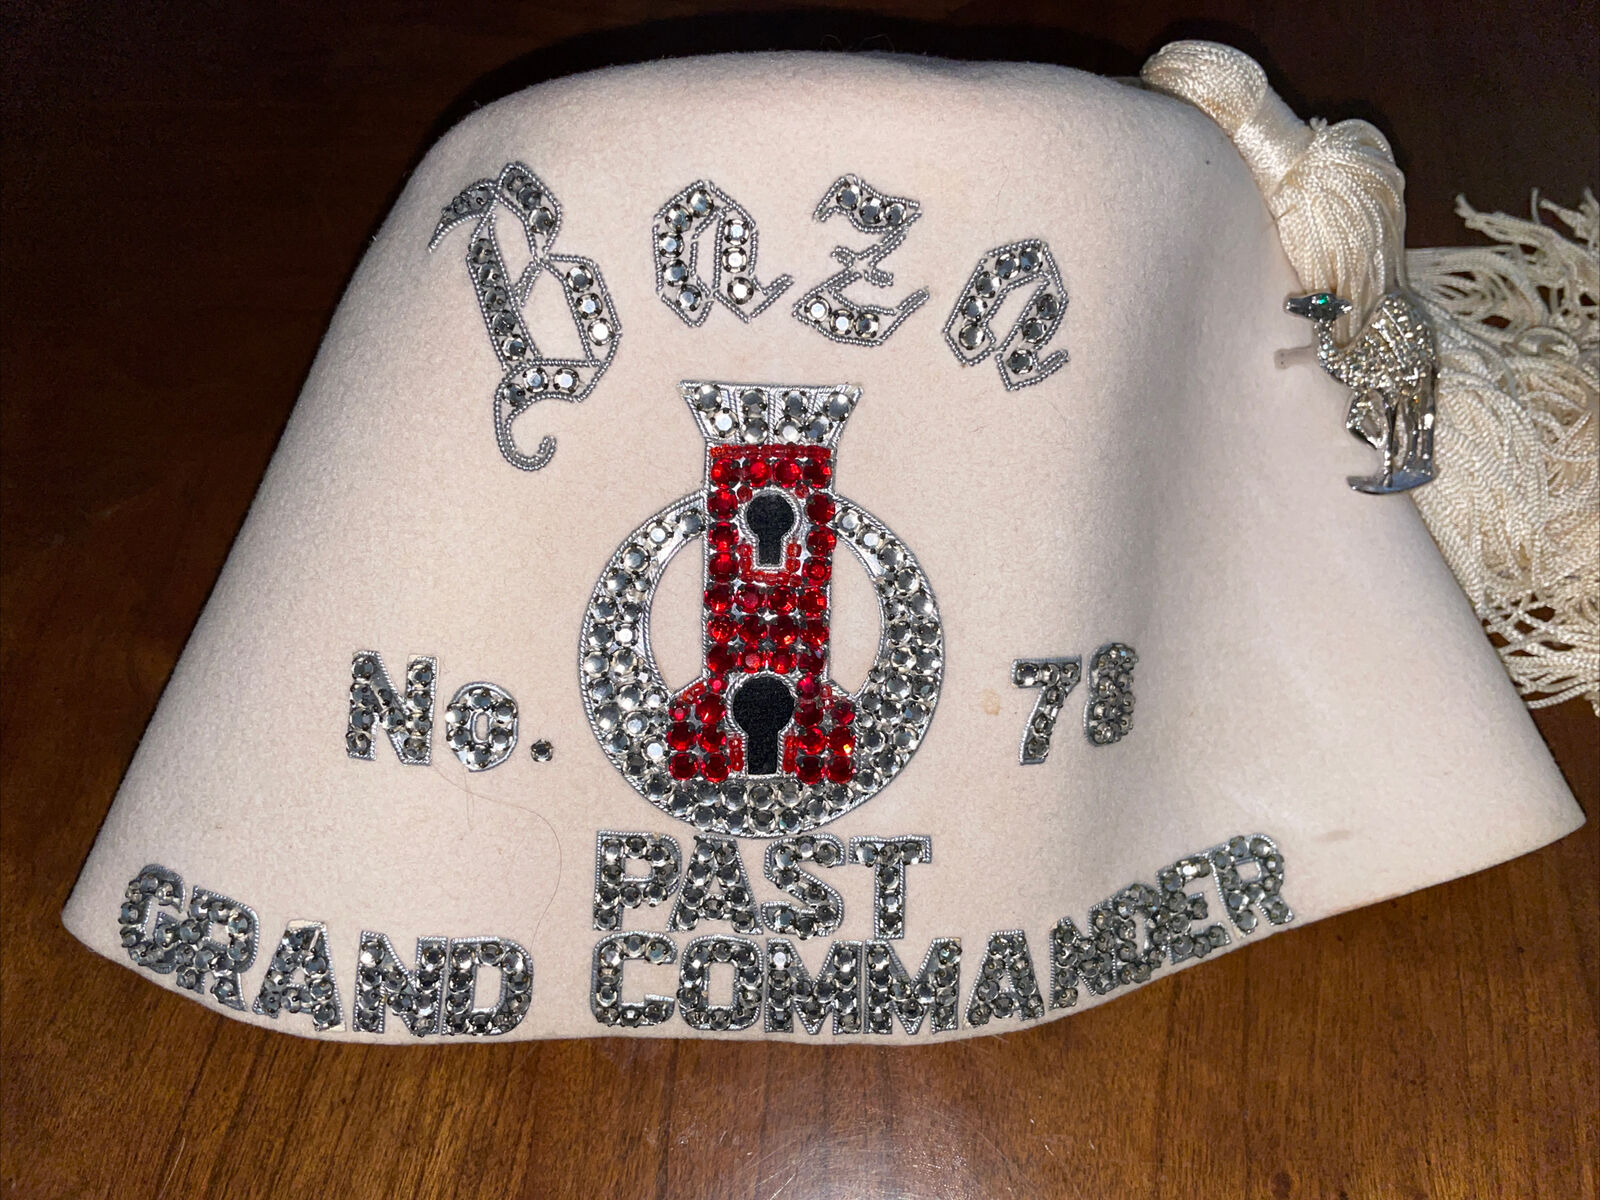 VTG 1978 Masonic Shriners Fez Hat Past Commander W/signed Pin Collectable Core